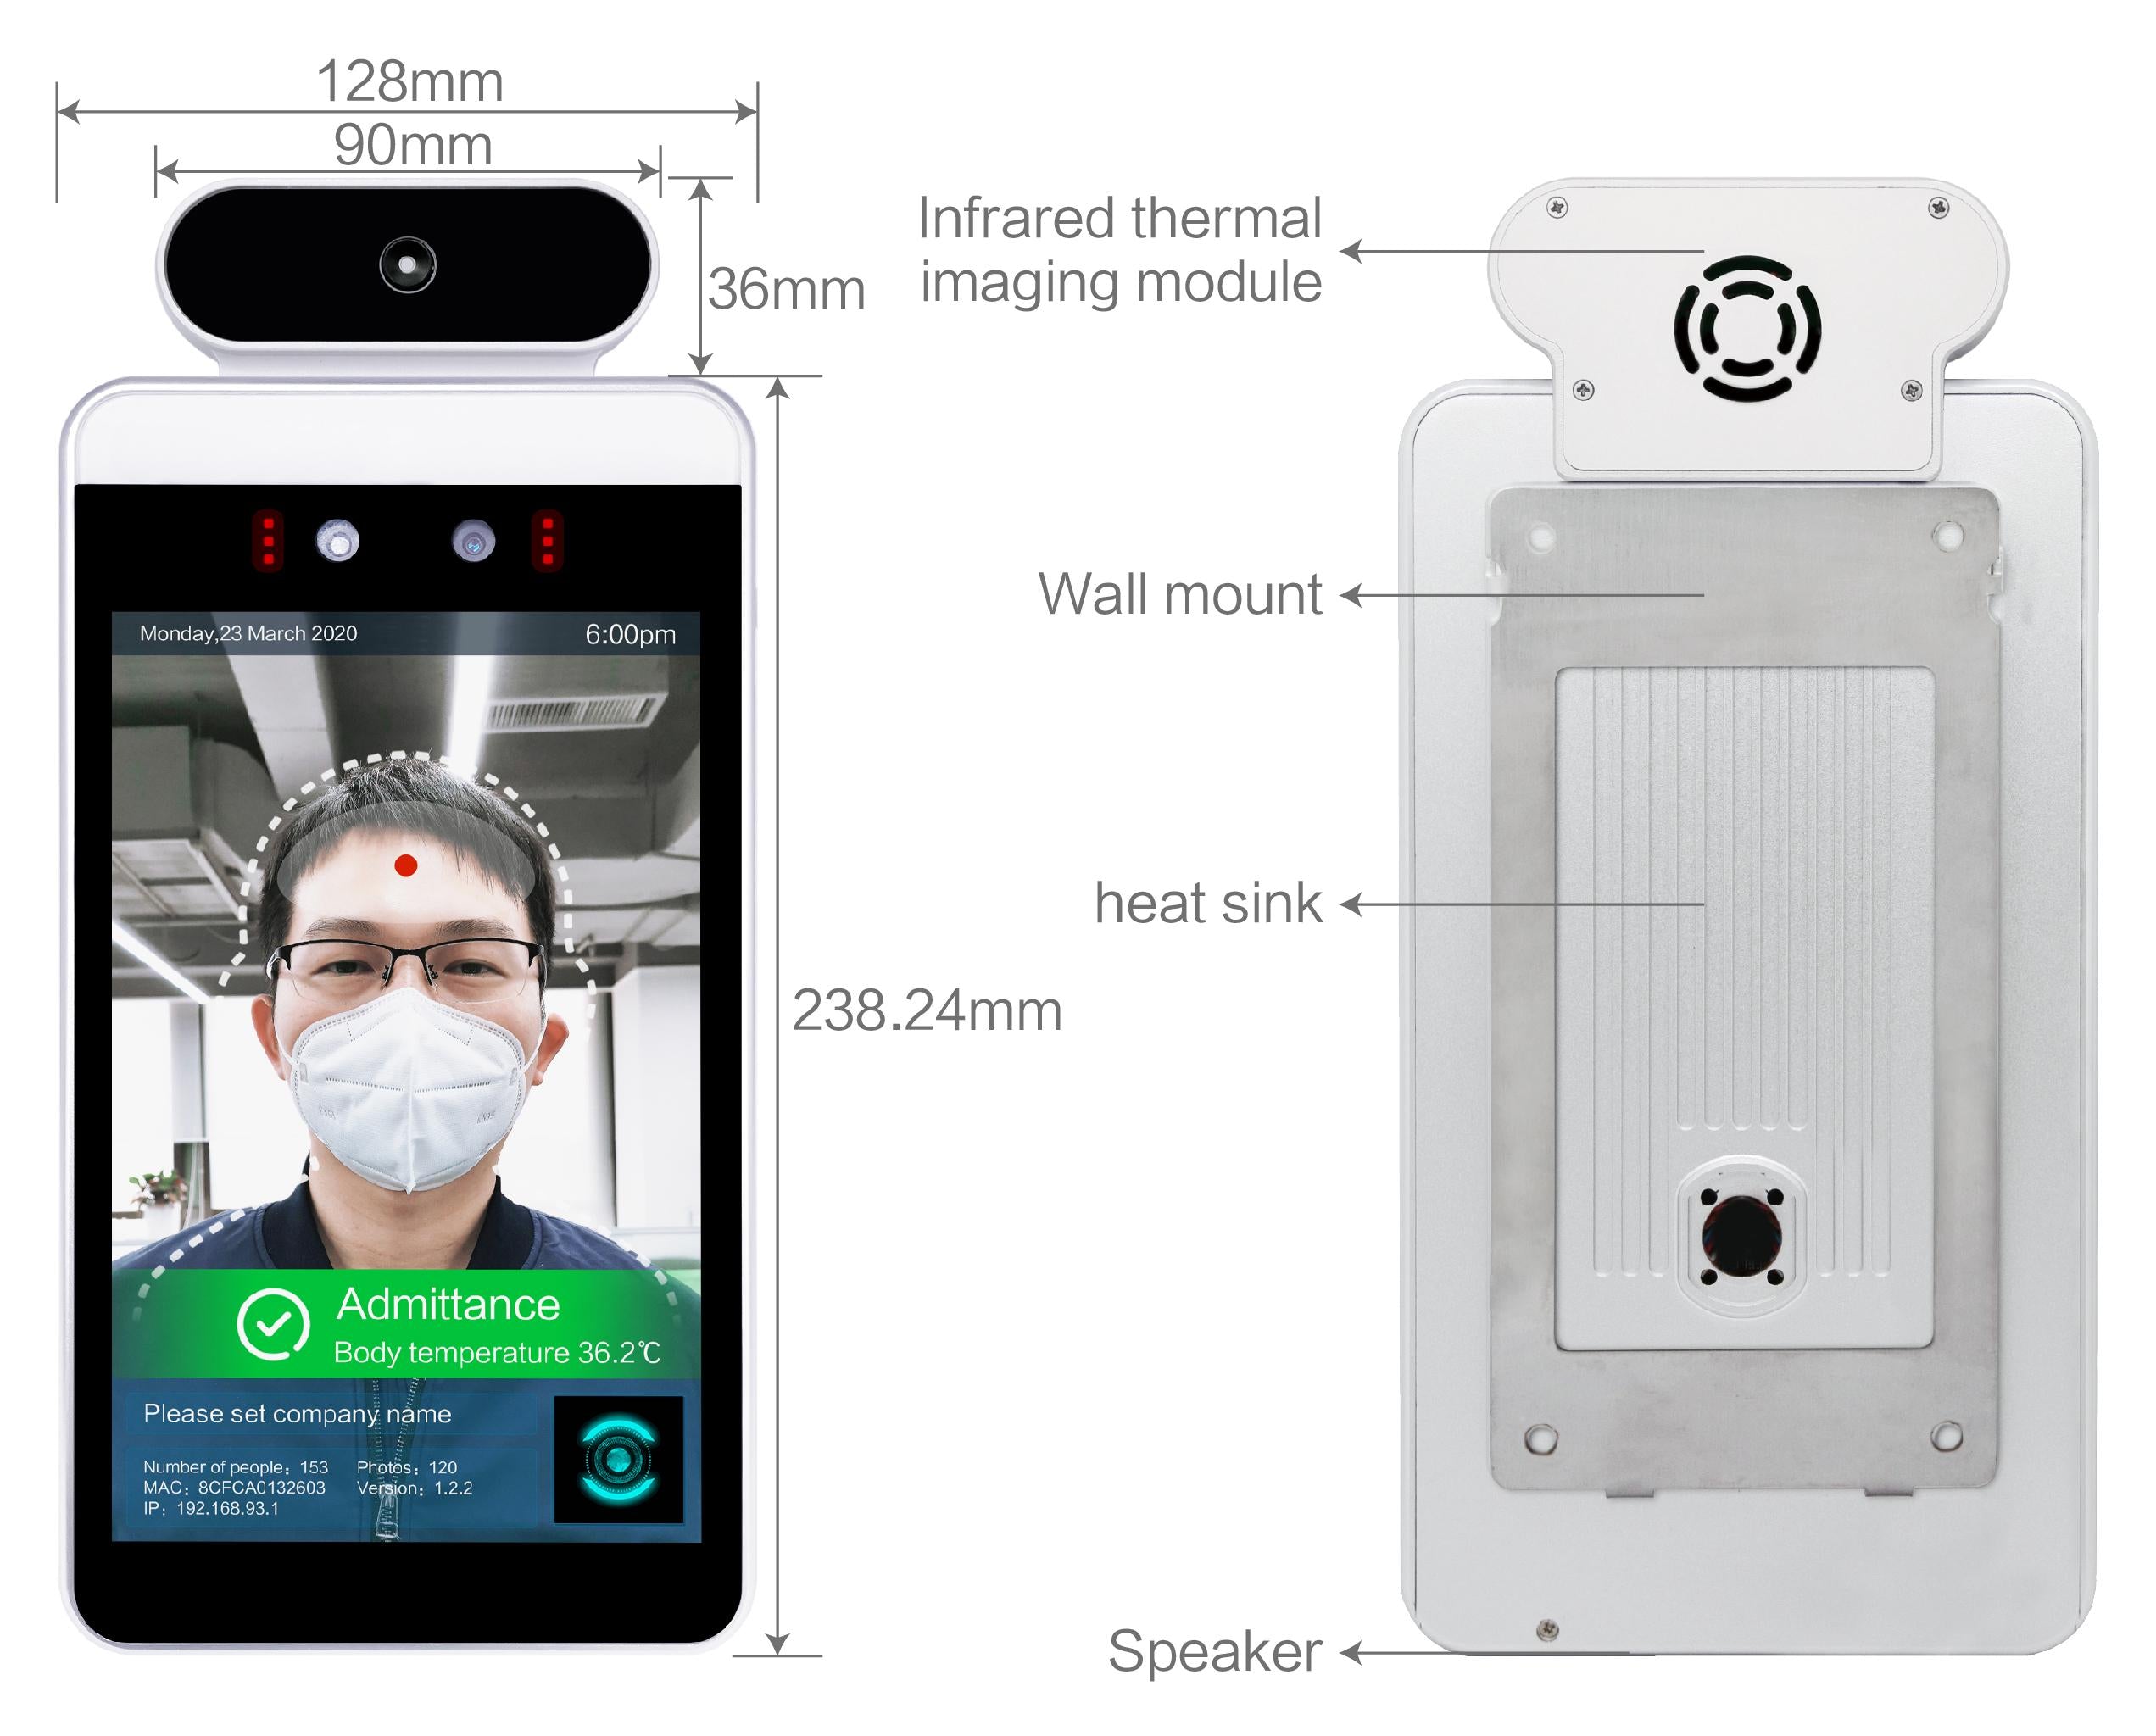 Pass Management Wall-mounted Module of Temperature Measurement & Face Recognition